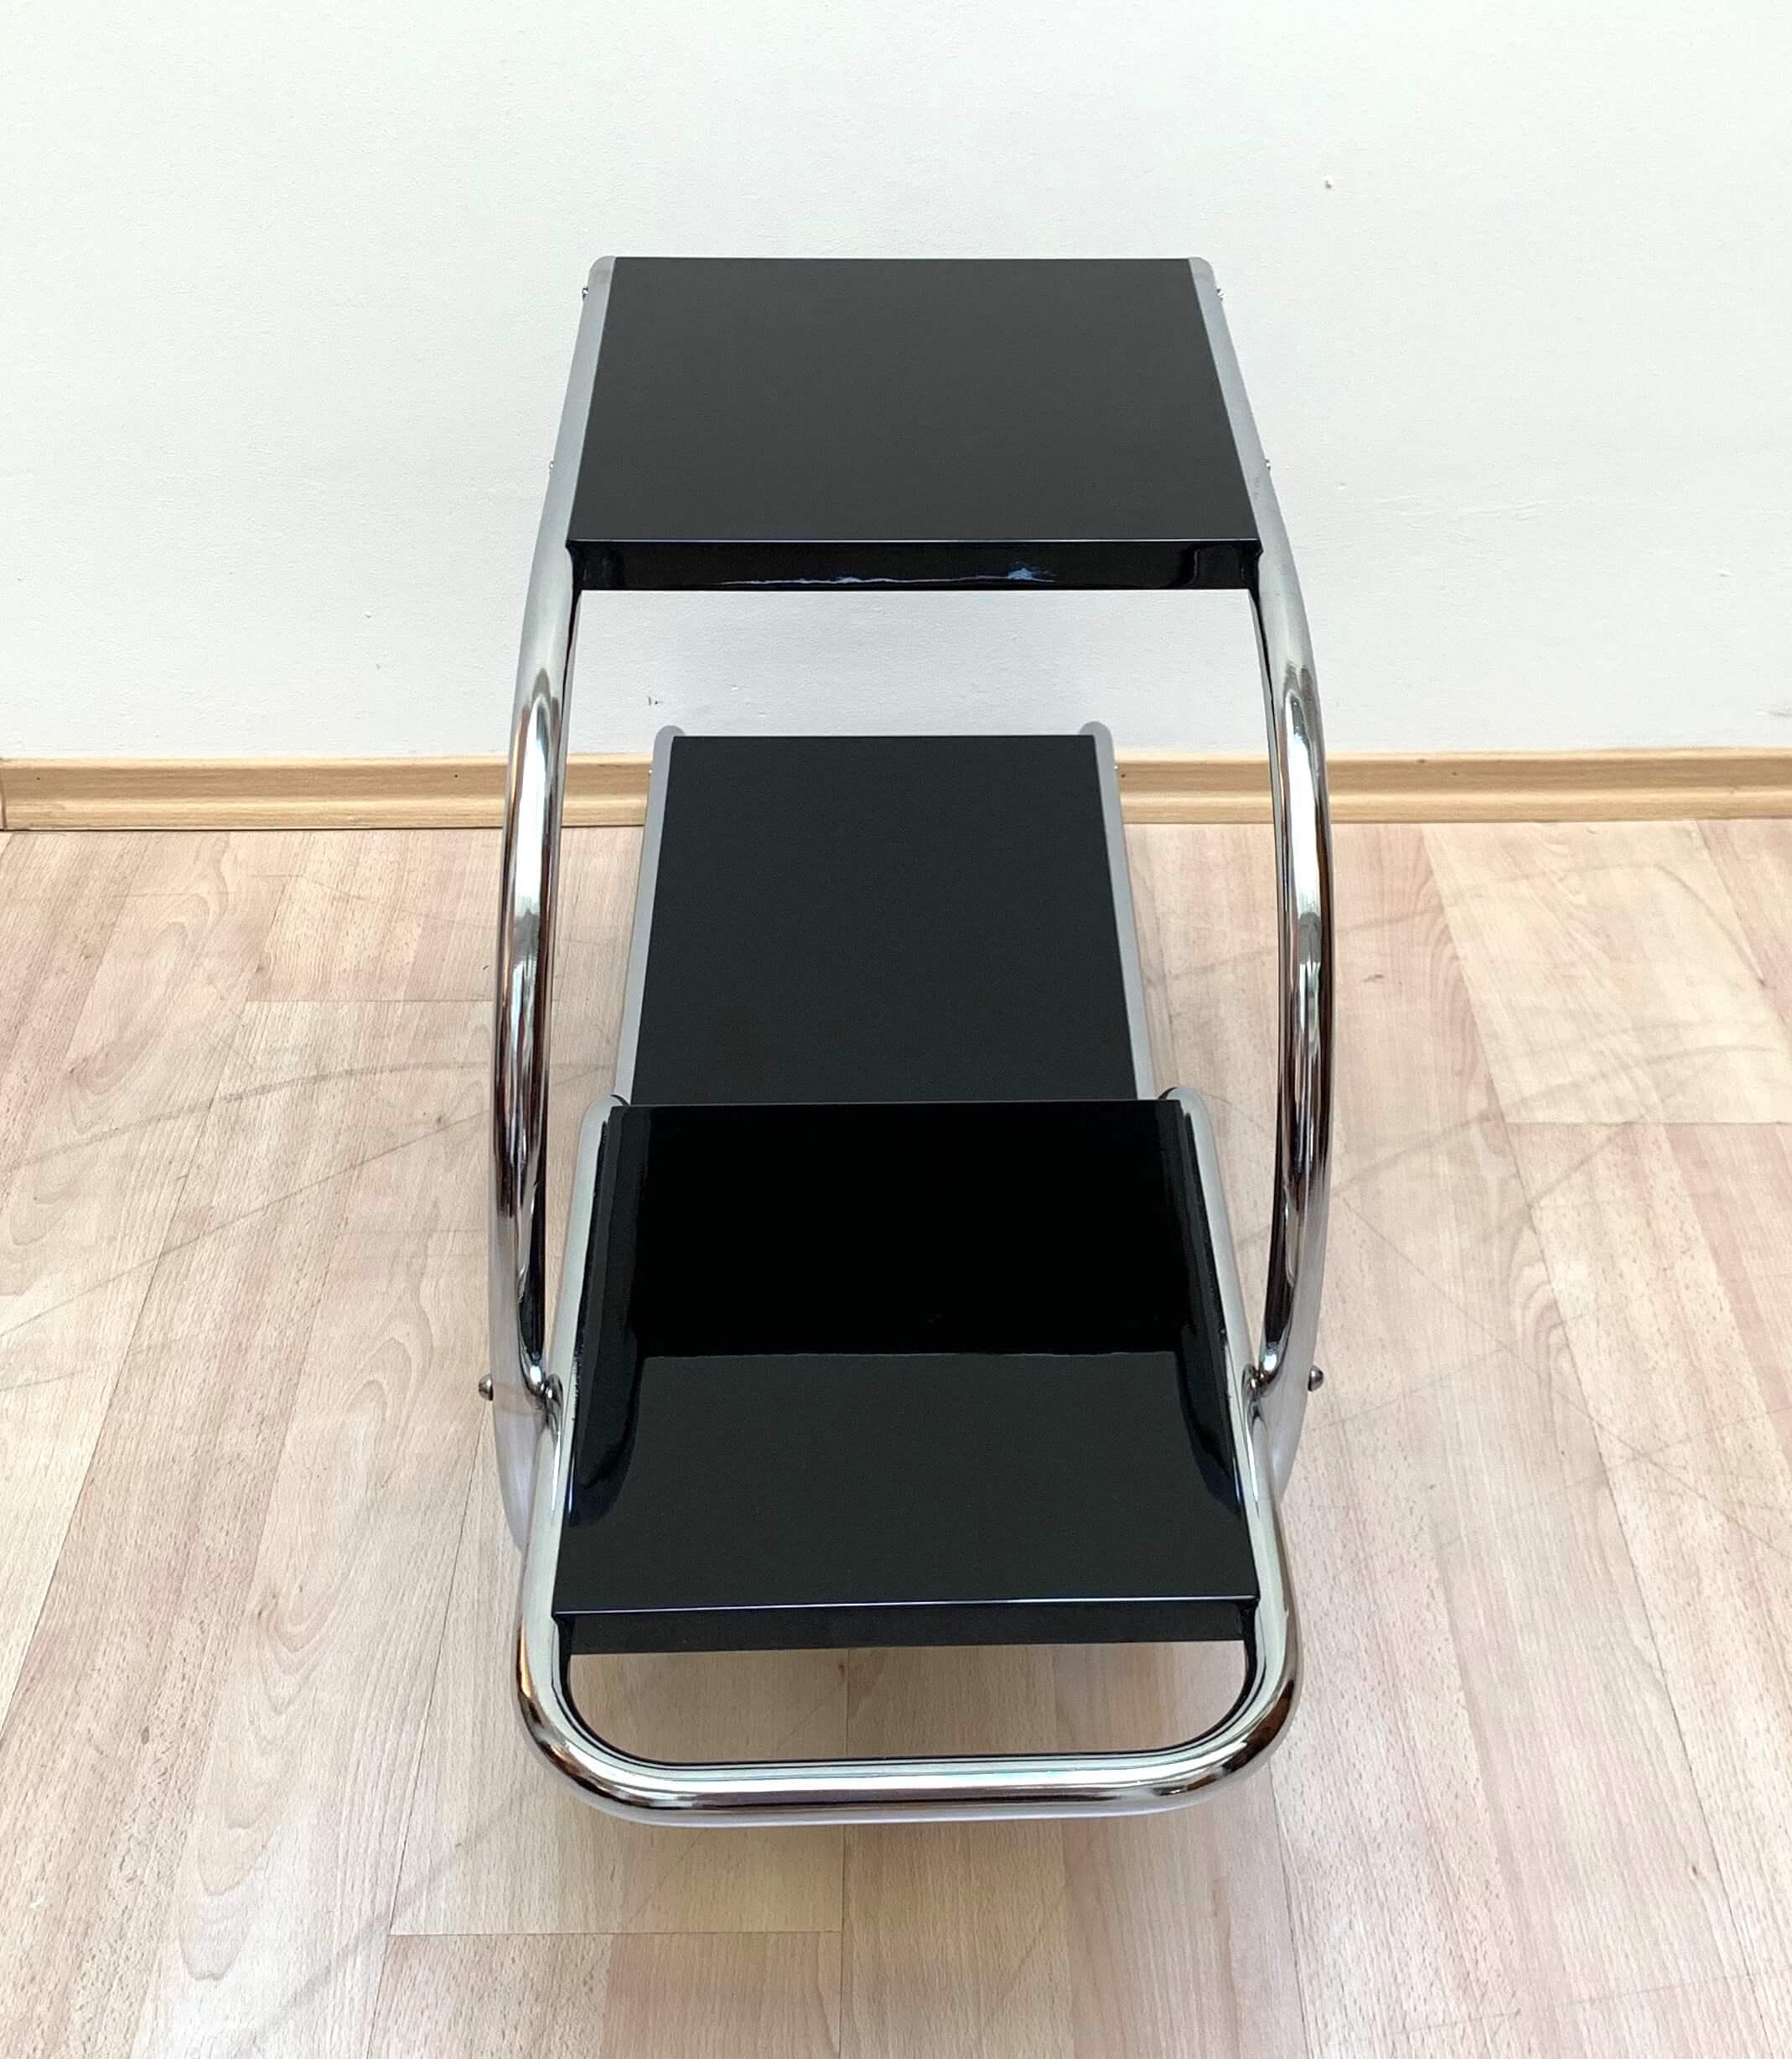 Bauhaus Steeltube Étagère, Nickel and Black Lacquer, Germany/Czechia, 1930s In Excellent Condition For Sale In Regensburg, DE